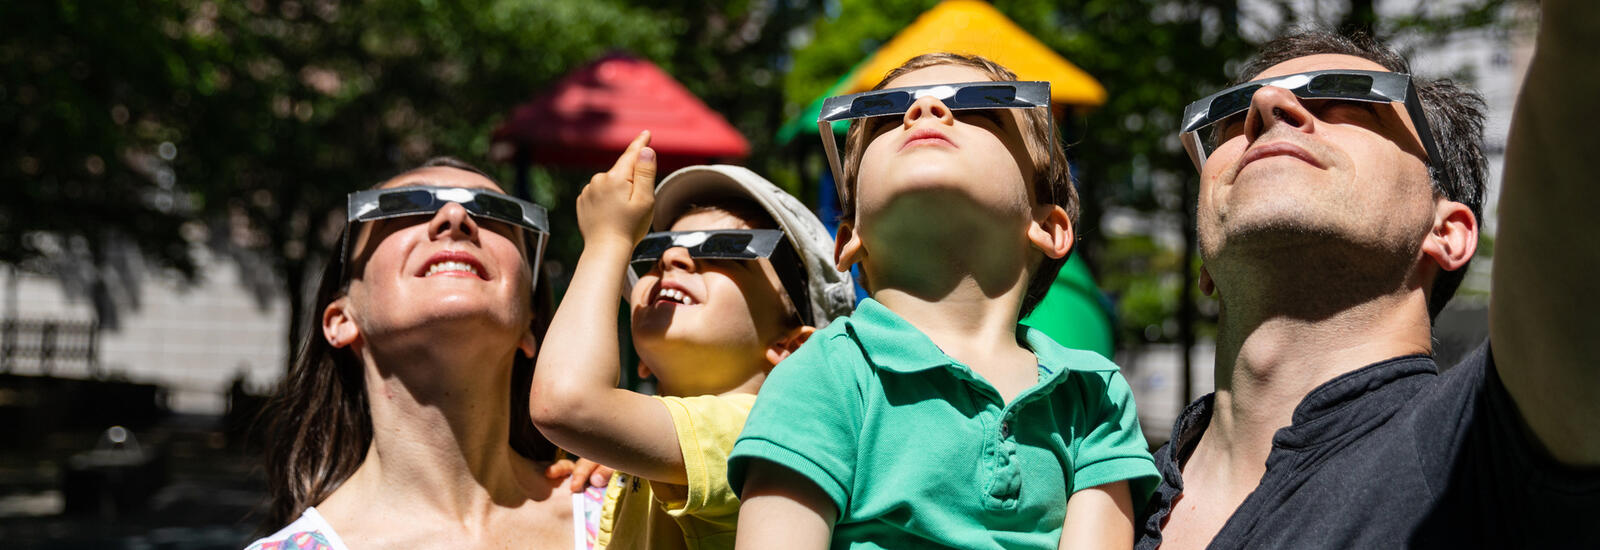 Parents and kids wearing eclipse glasses looking up at an eclipse.